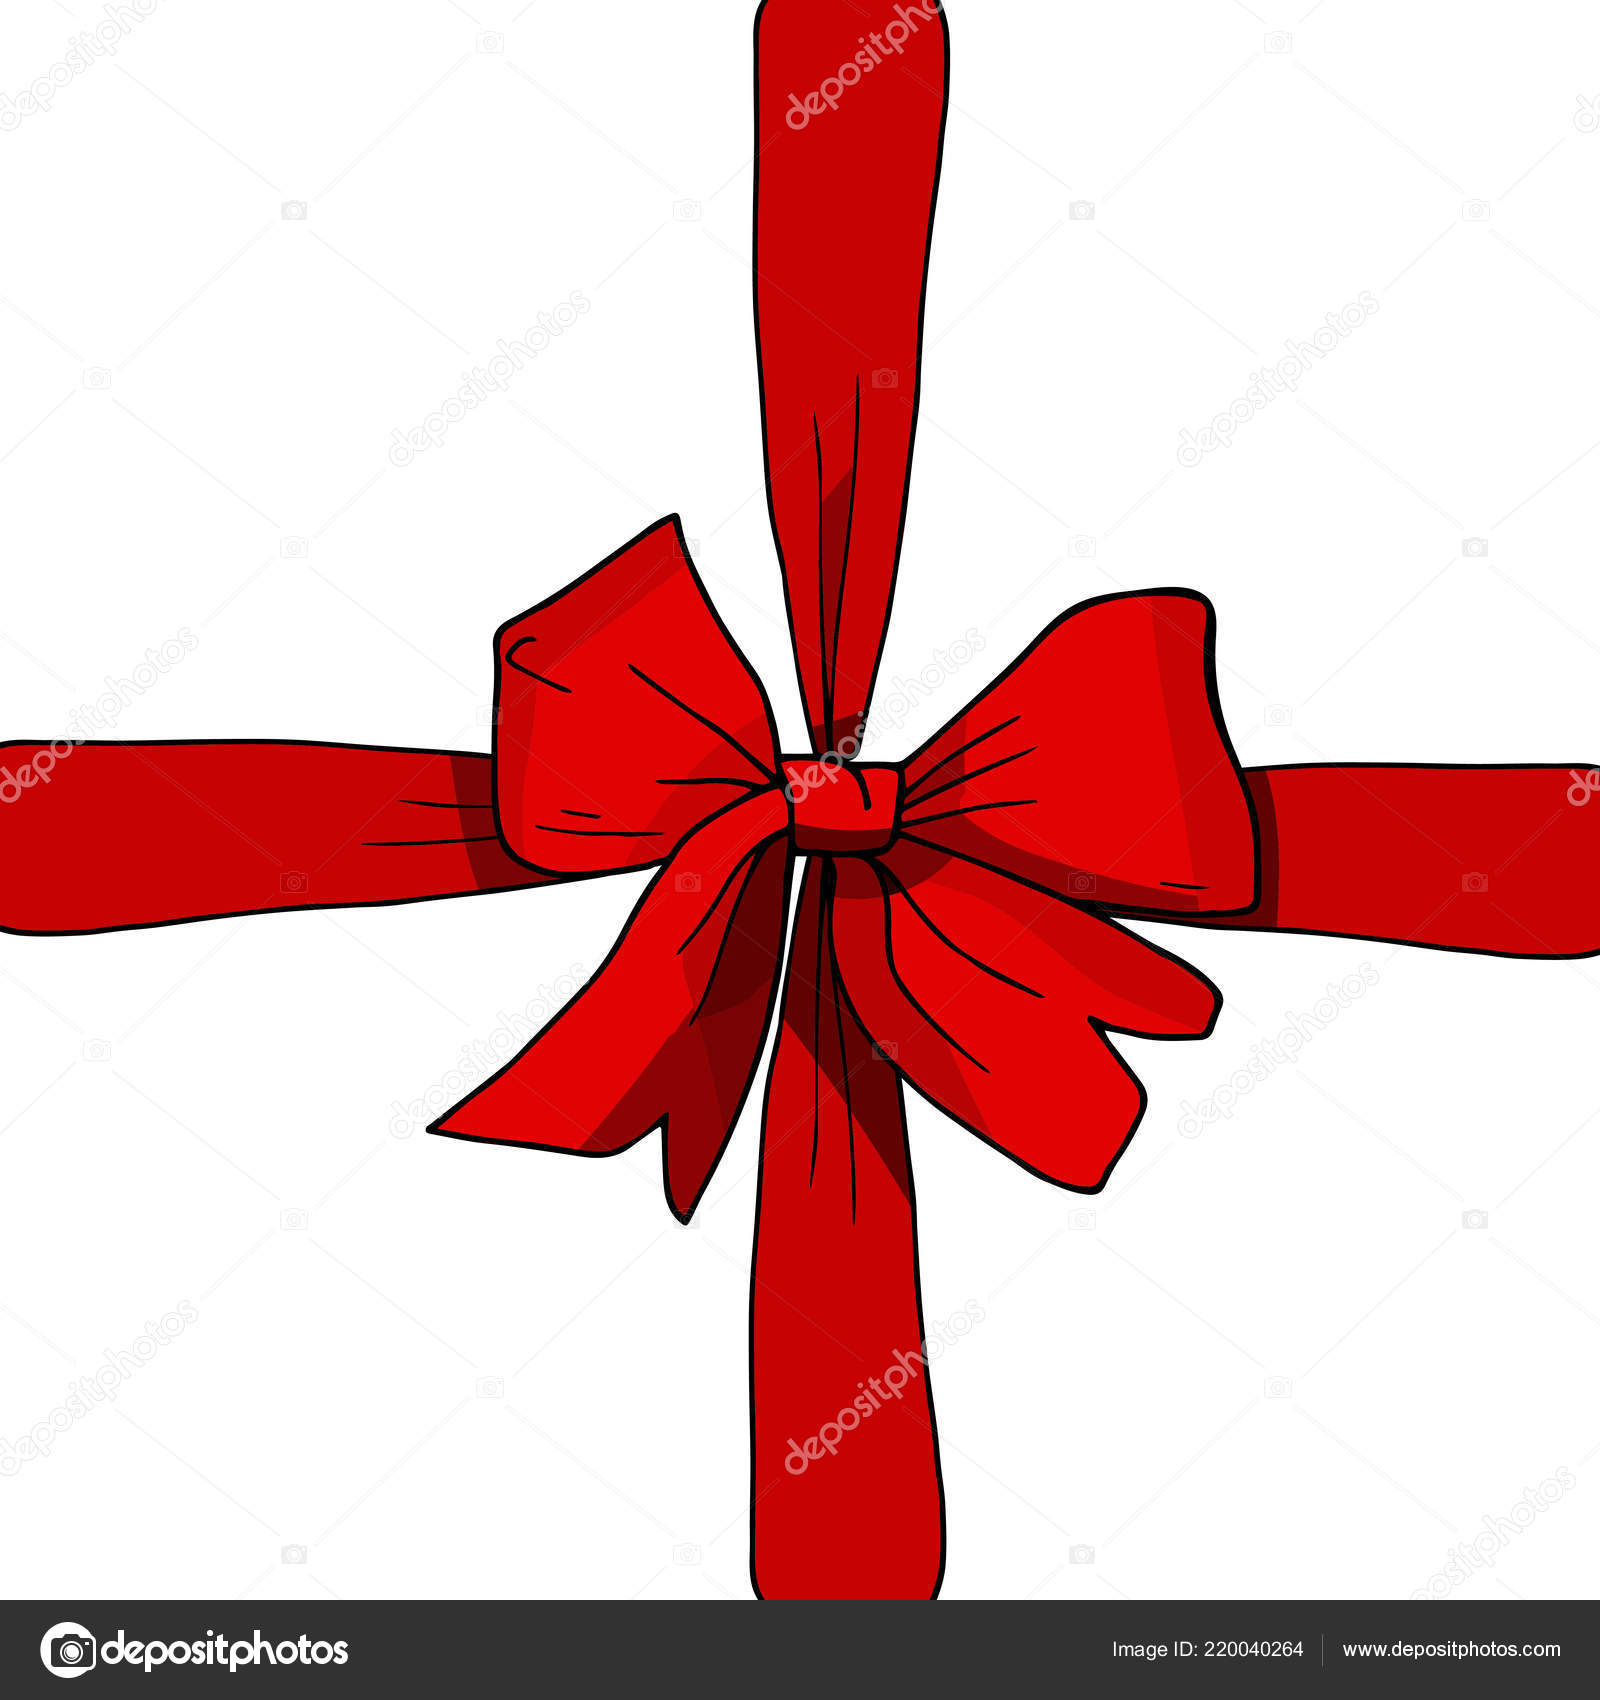 Red Ribbons Bows Vector Set Stock Vector by ©barbaliss 221046408